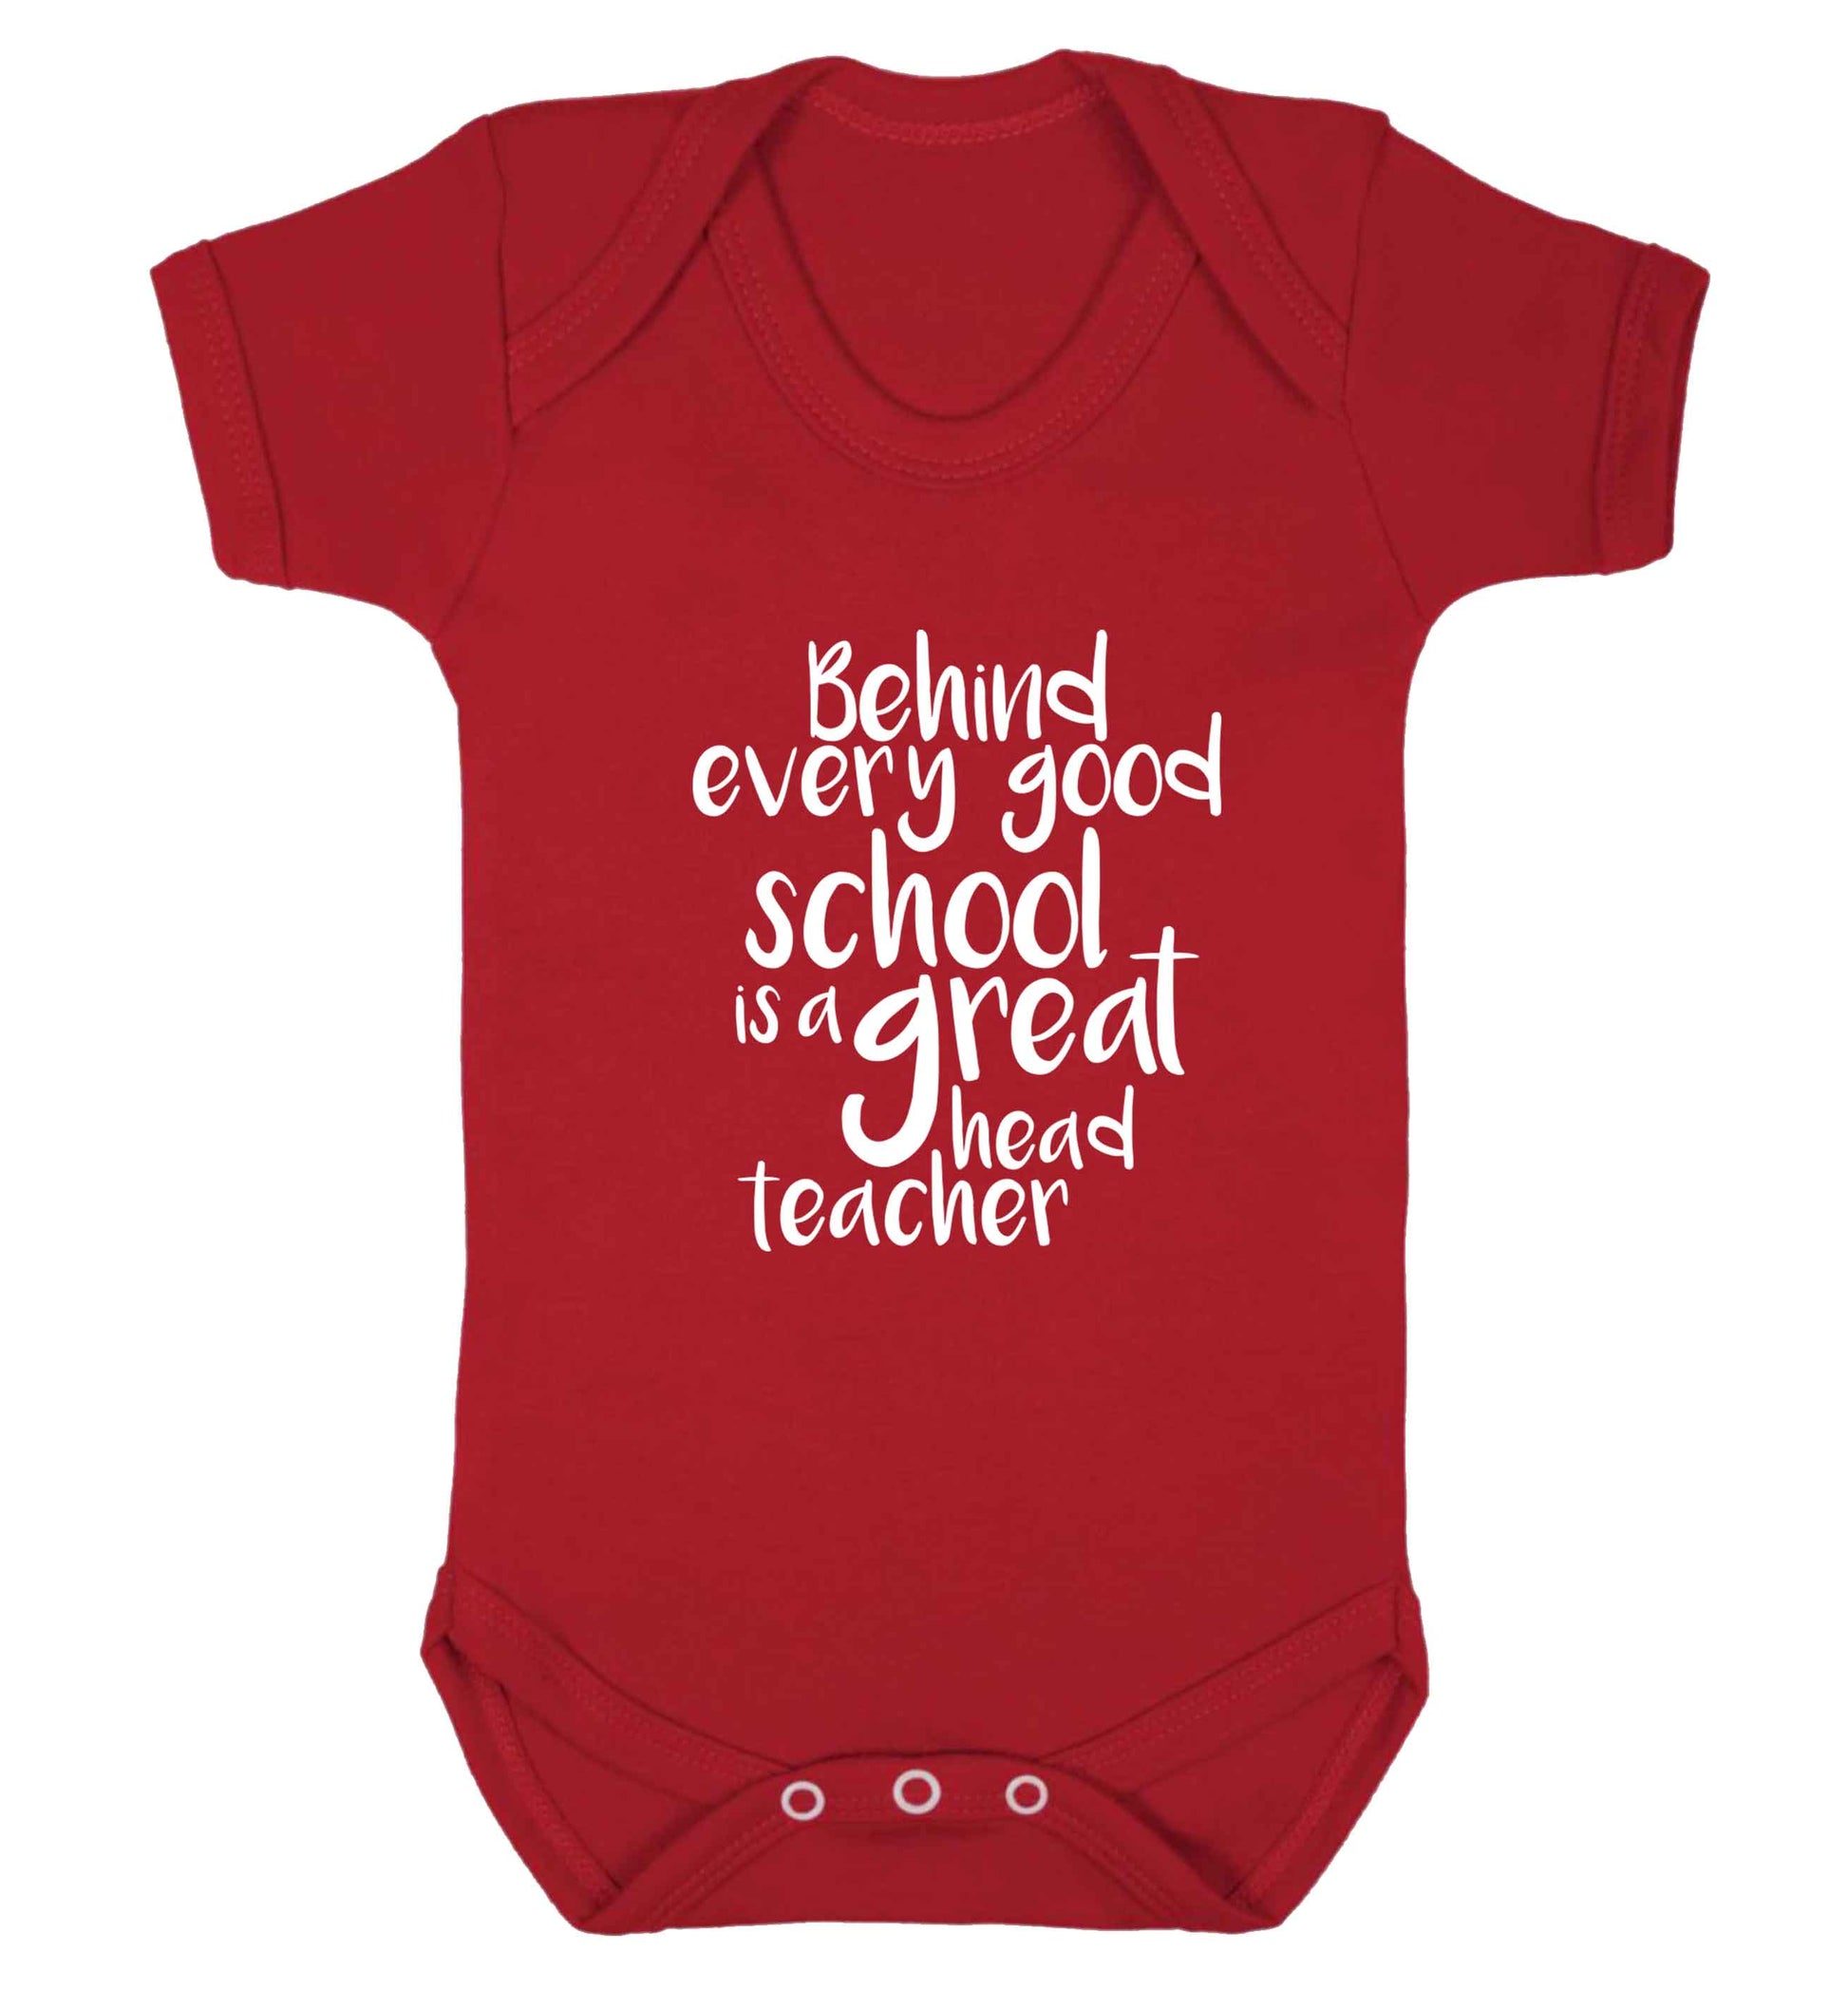 Behind every good school is a great head teacher baby vest red 18-24 months